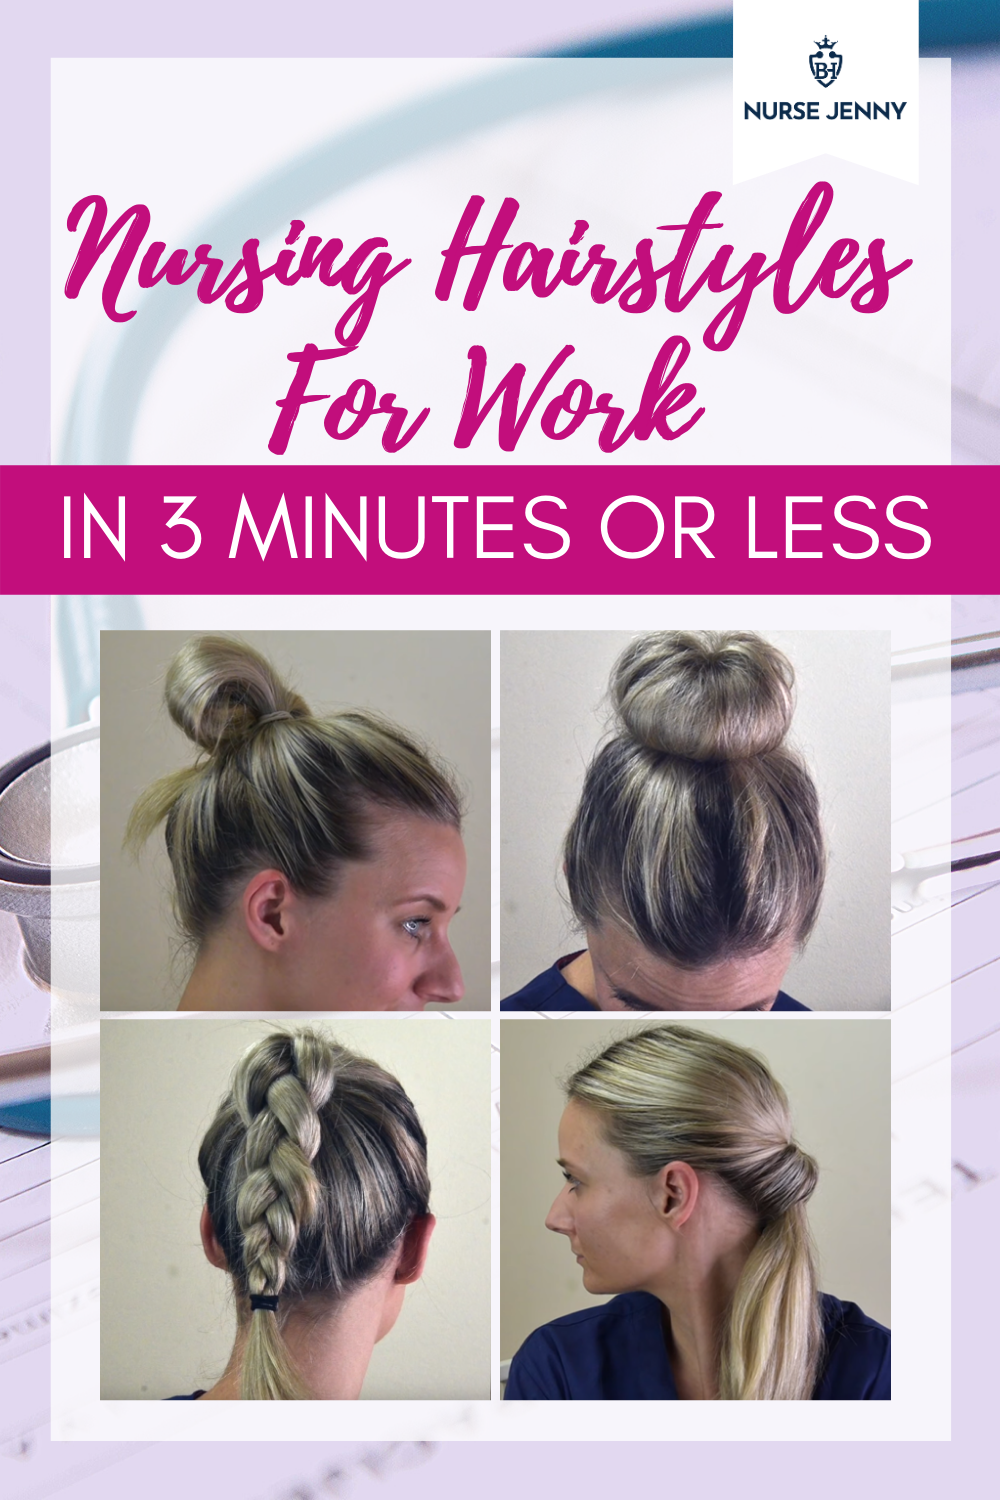 3 Ways to Do a Messy Updo - wikiHow